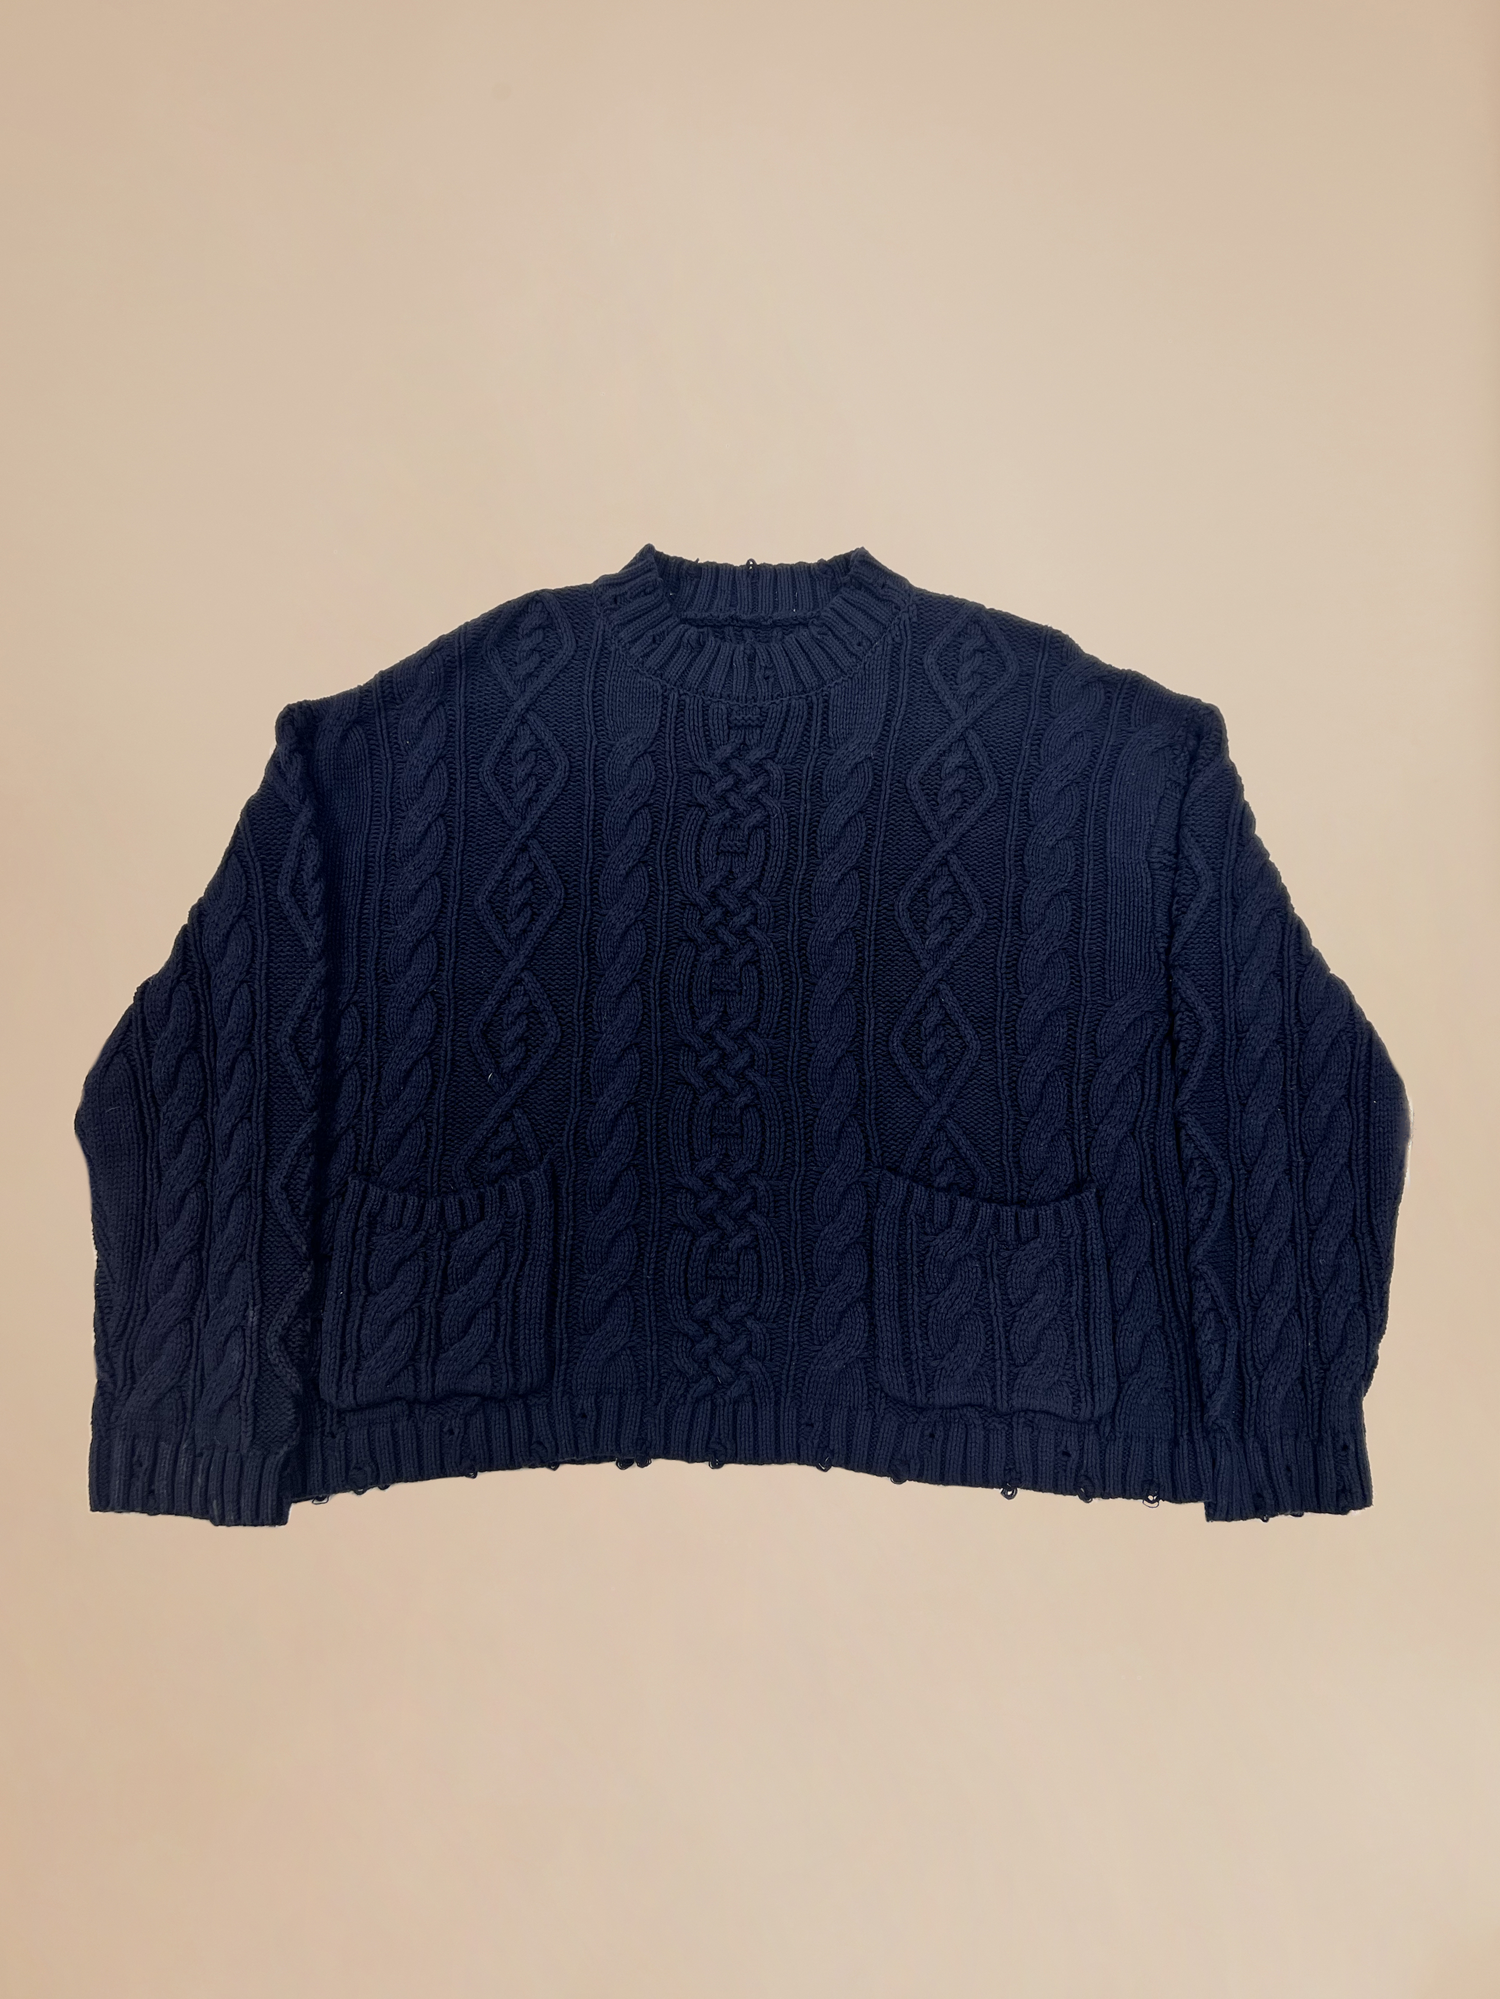 Sample 21 (Distressed Knitted Cable Knit Sweater)